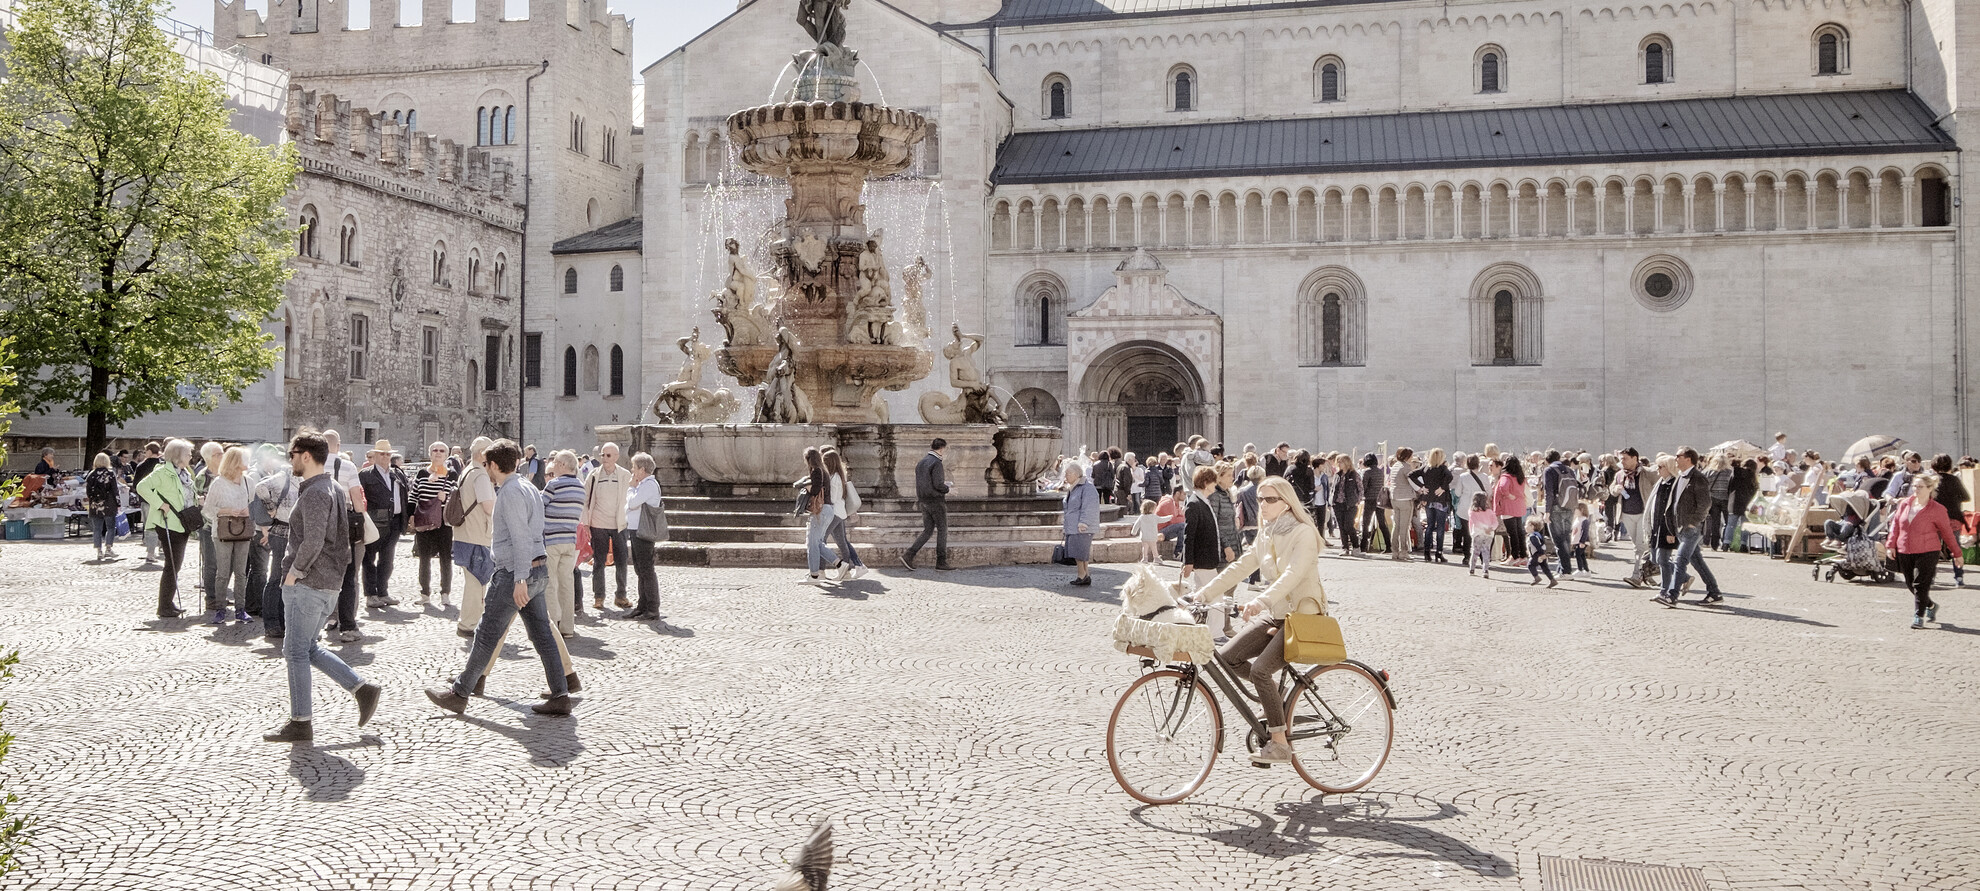 10 things to do in Trento